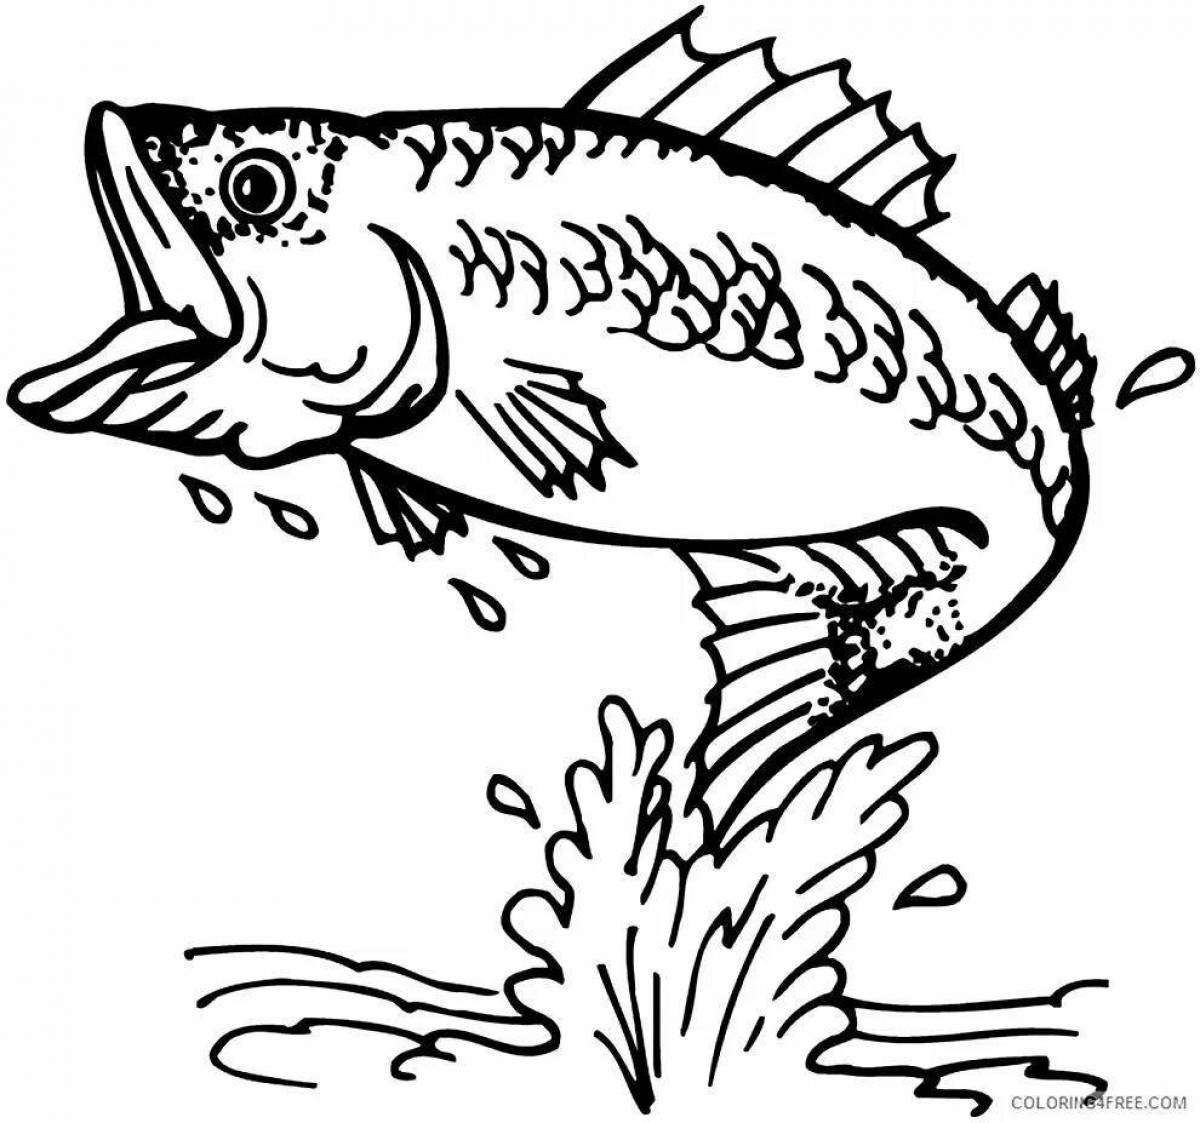 Playful fish coloring book for boys